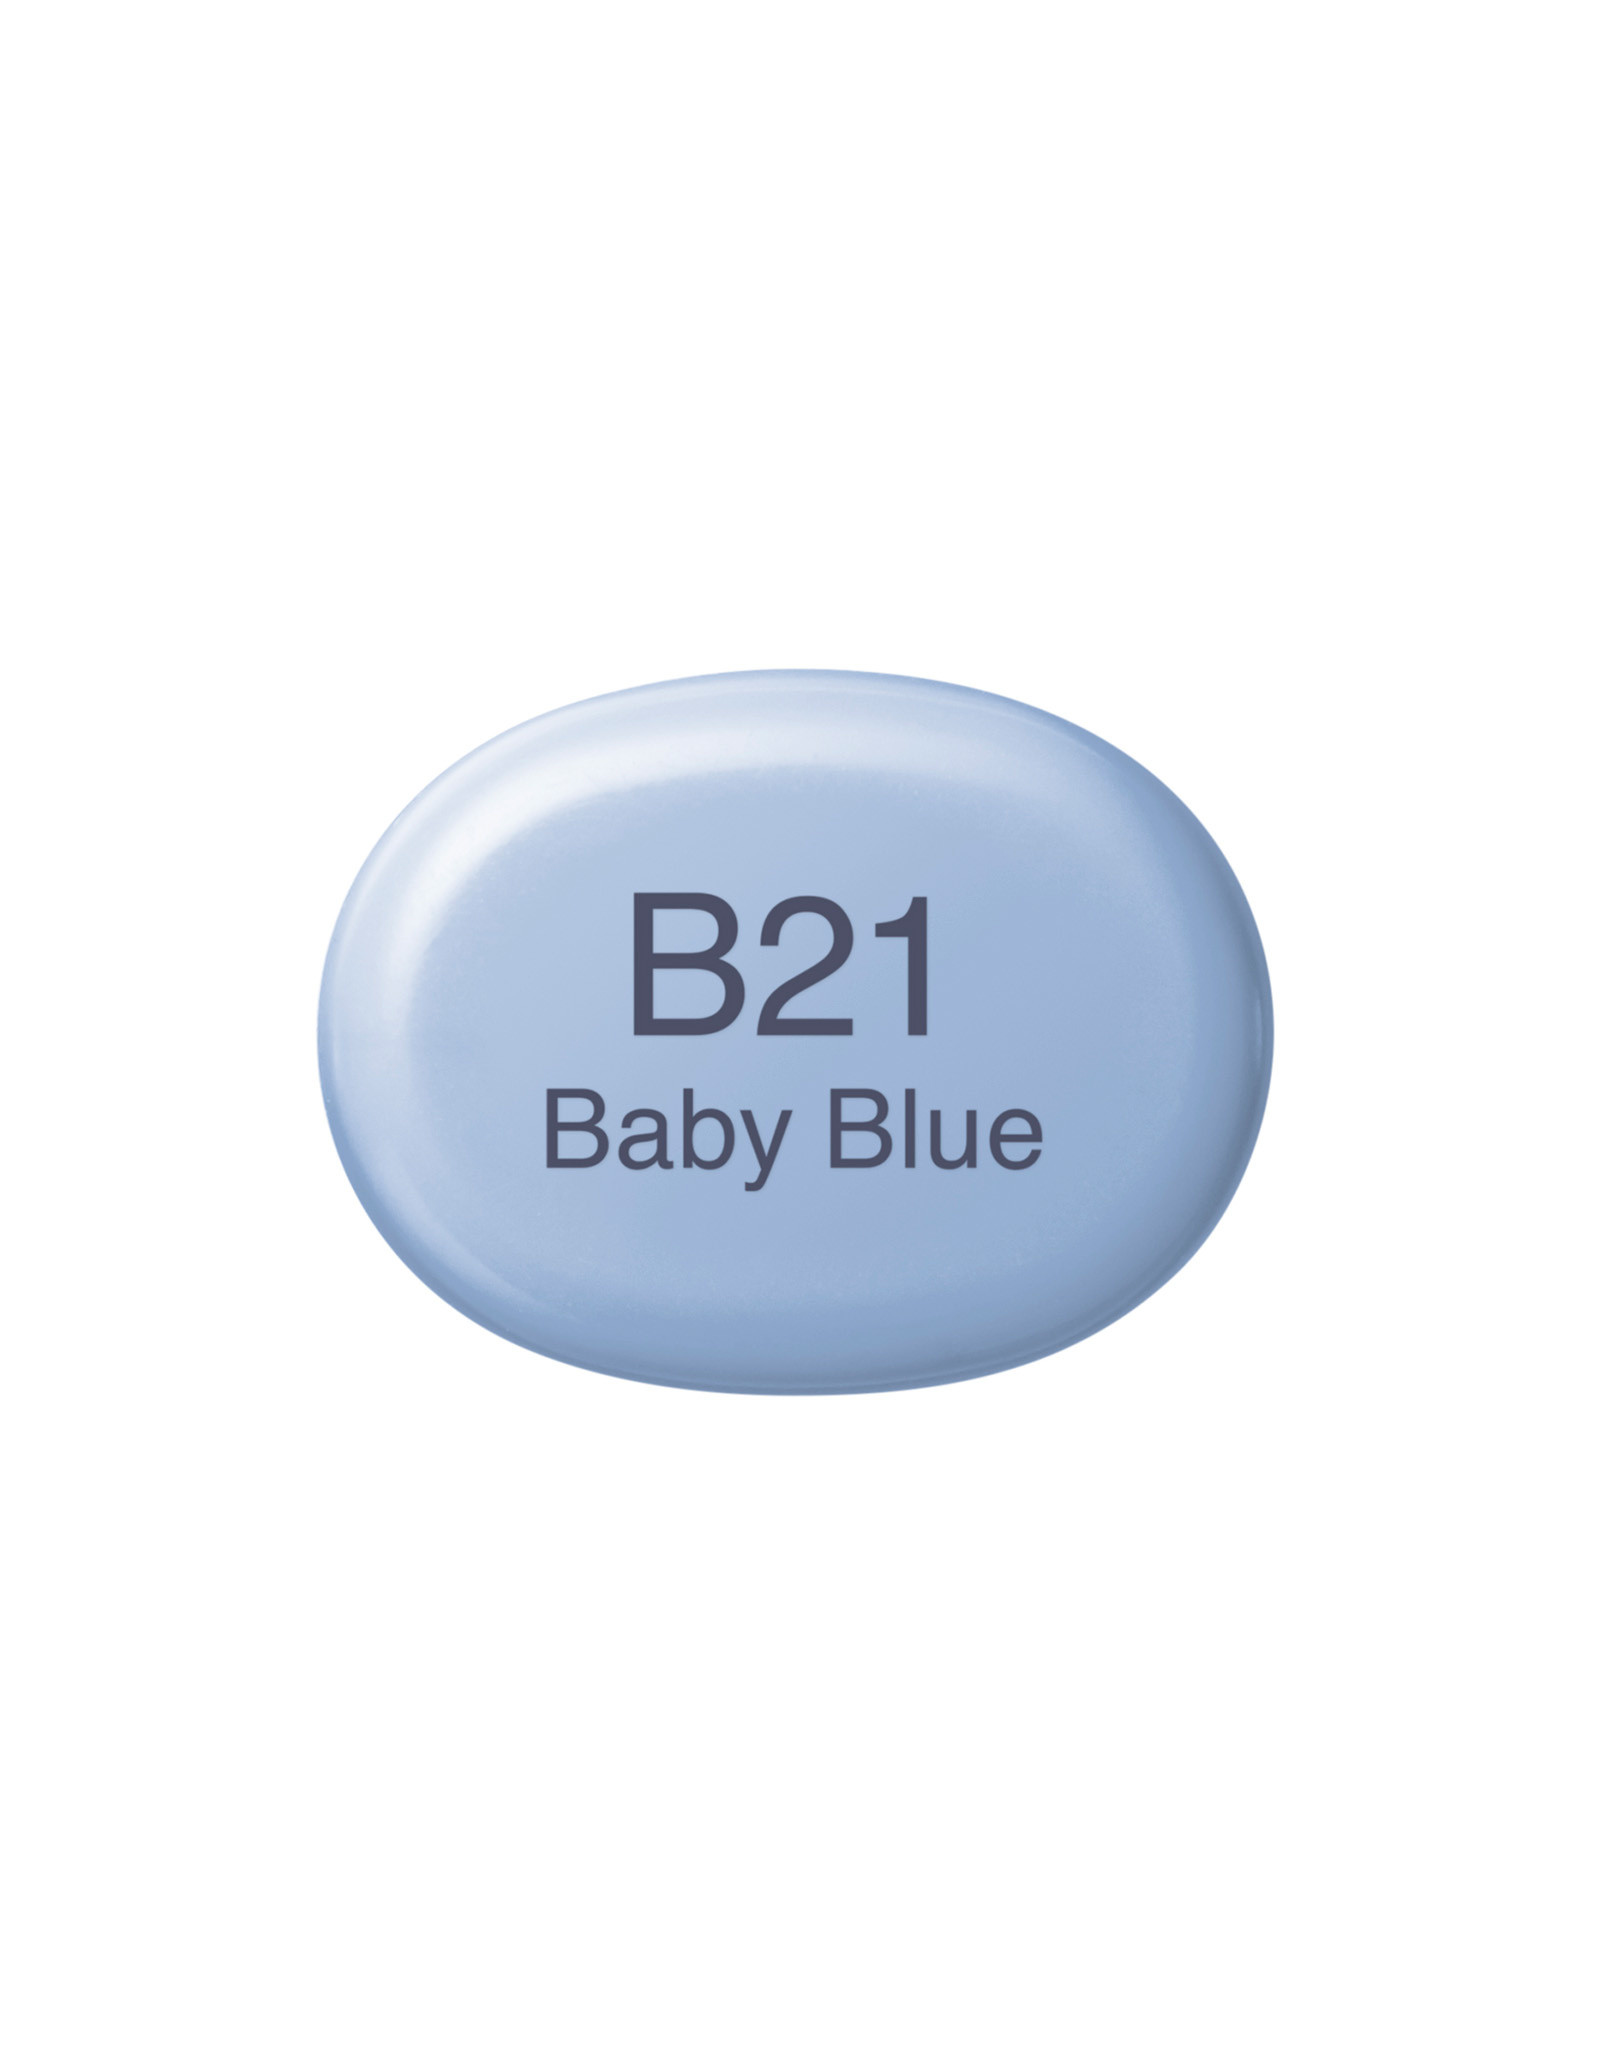 COPIC COPIC Sketch Marker B21 Baby Blue